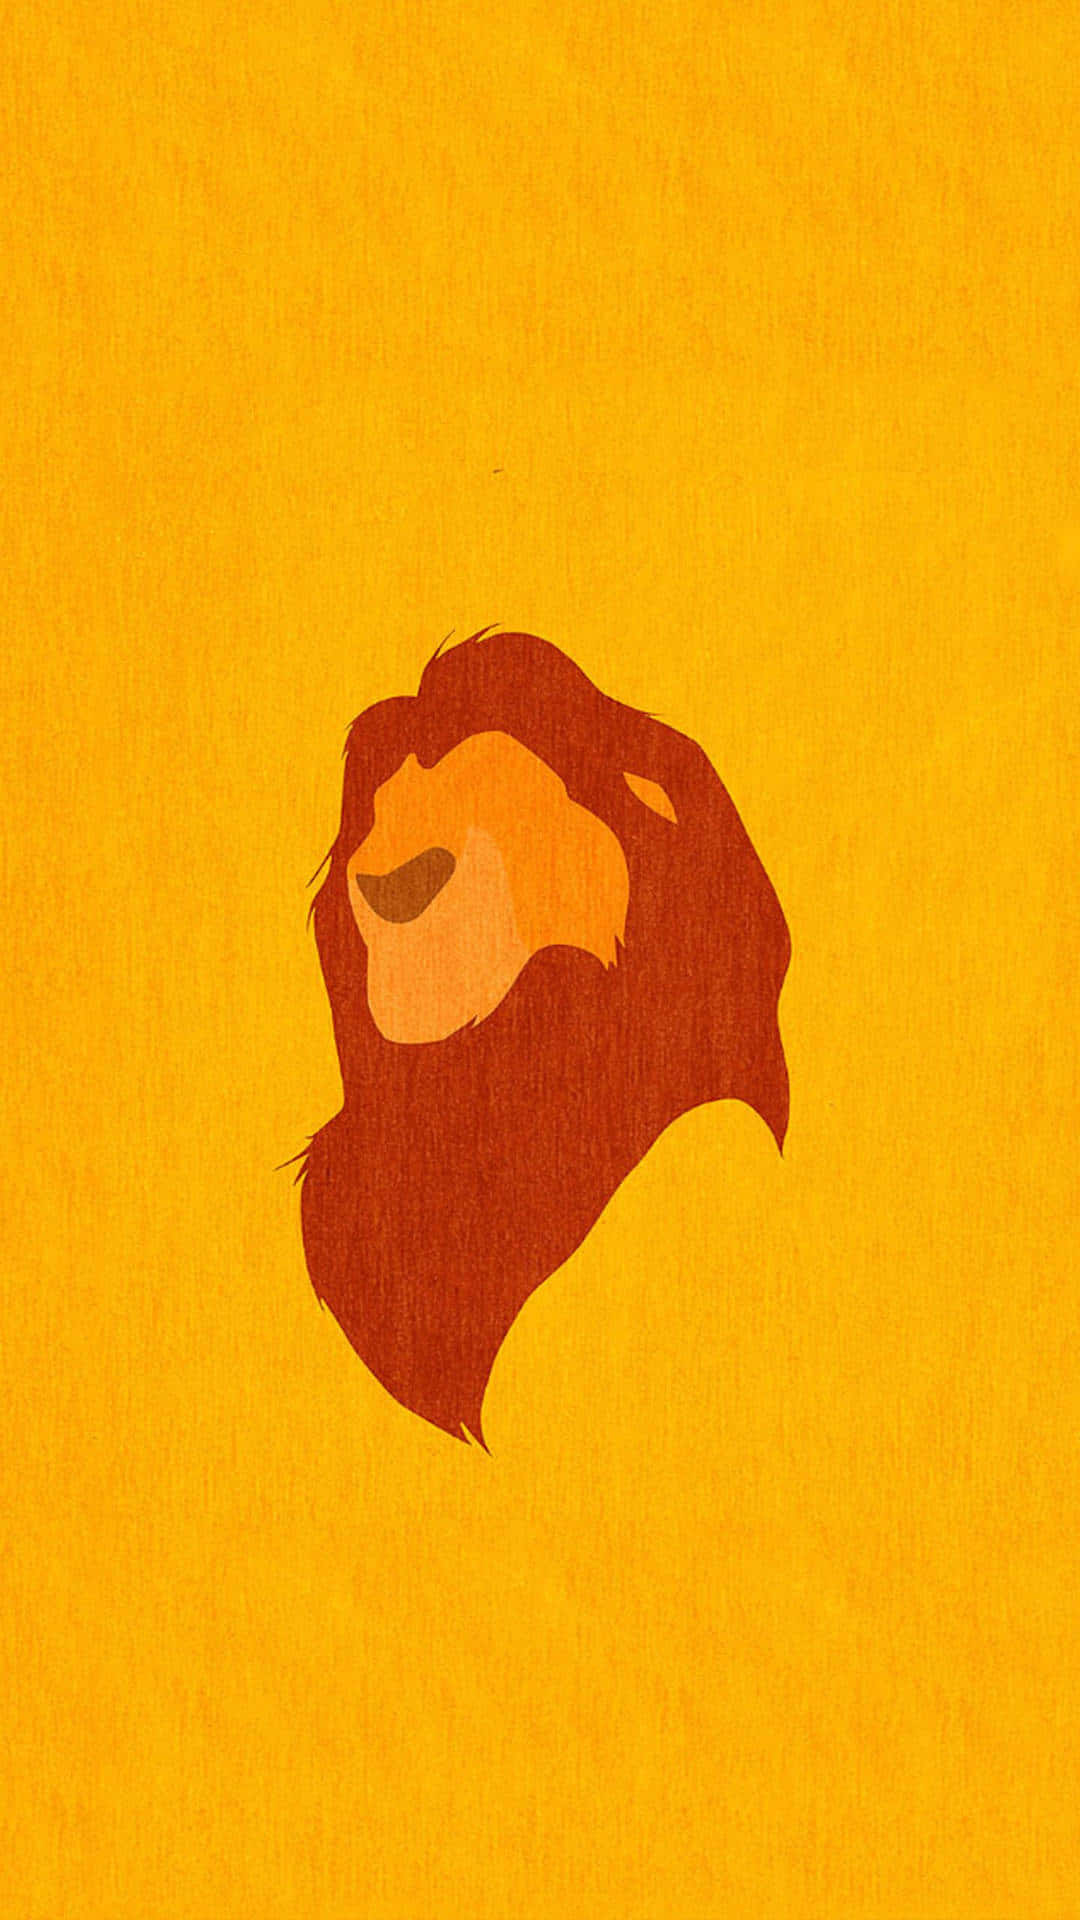 Simba Iconic Lion King Silhouette Background